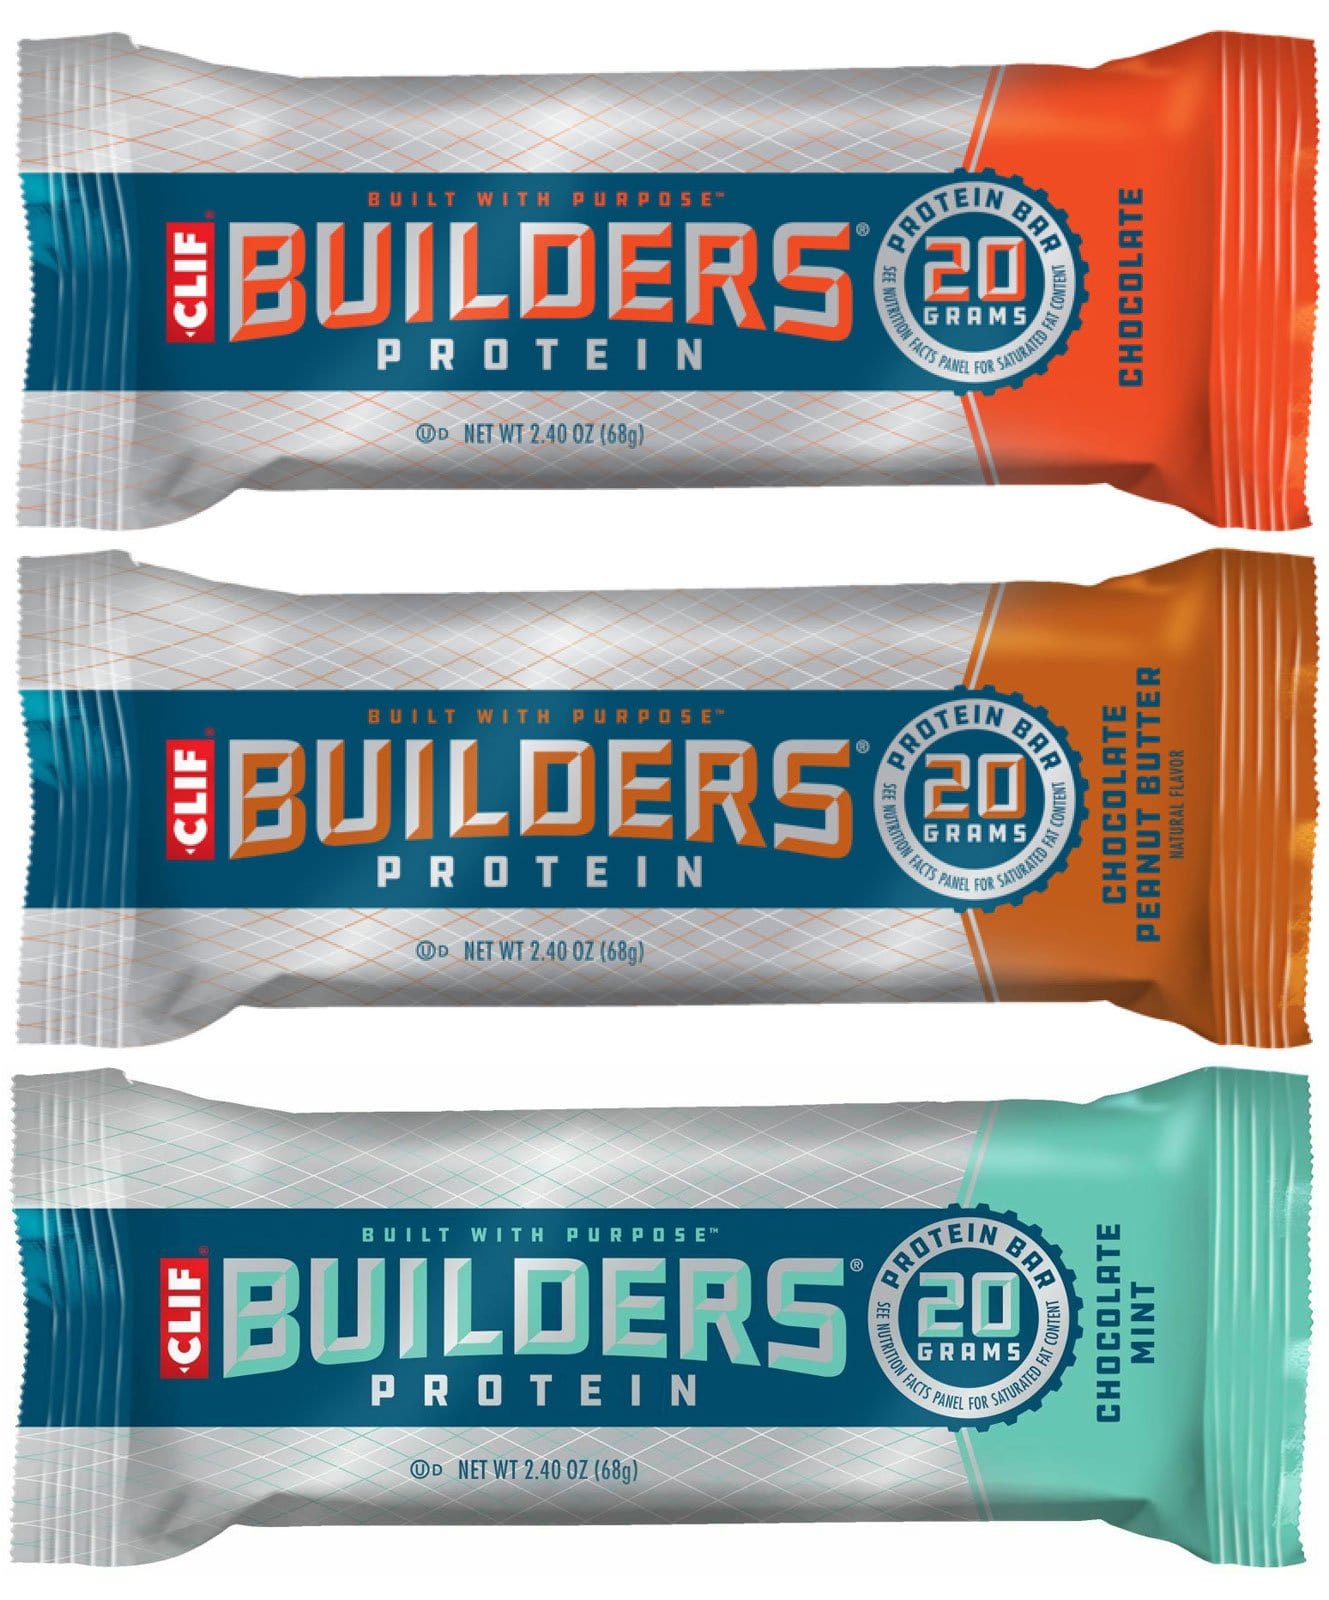 clif Energy Bar Box of 12 / Mixed Box Builders Protein Bar CLIFBBMB